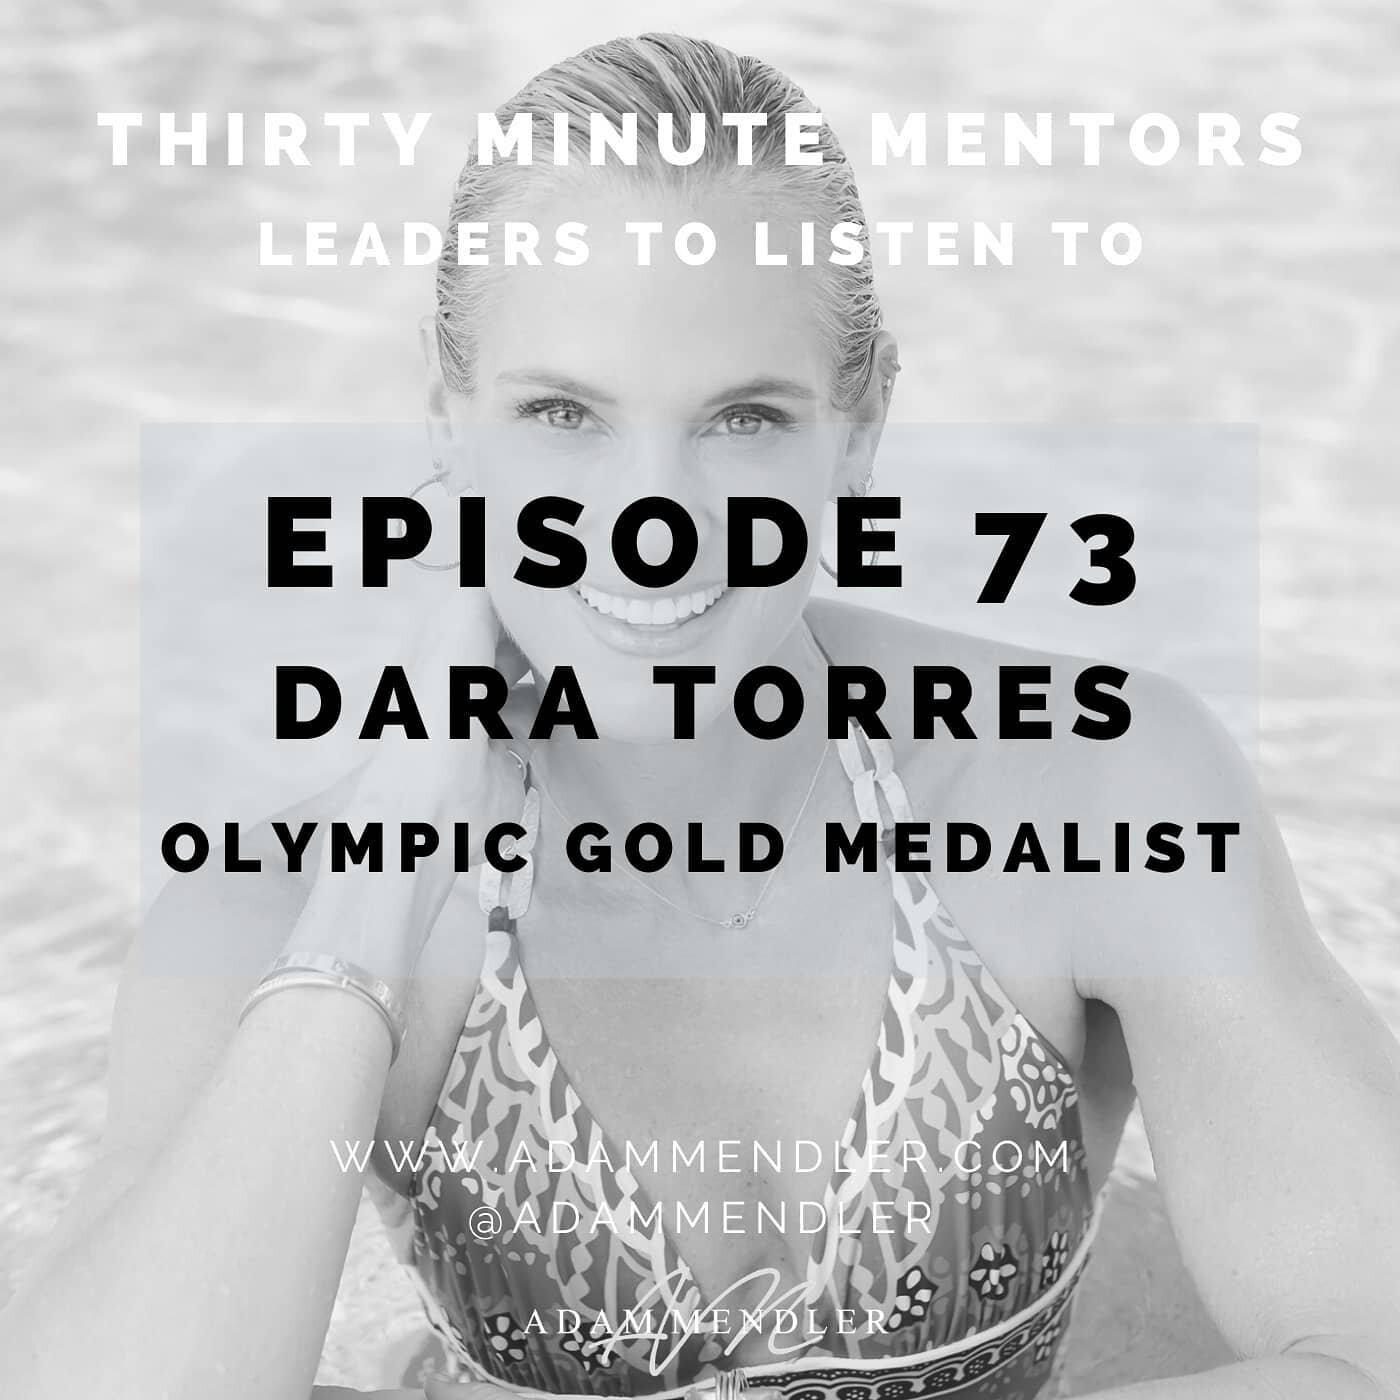 Dara Torres is one of the most decorated Olympic athletes in history: winner of four Olympic gold medals and twelve medals in total, a record among women. Dara competed in five Olympic games, winning a gold medal as a high school student and three si